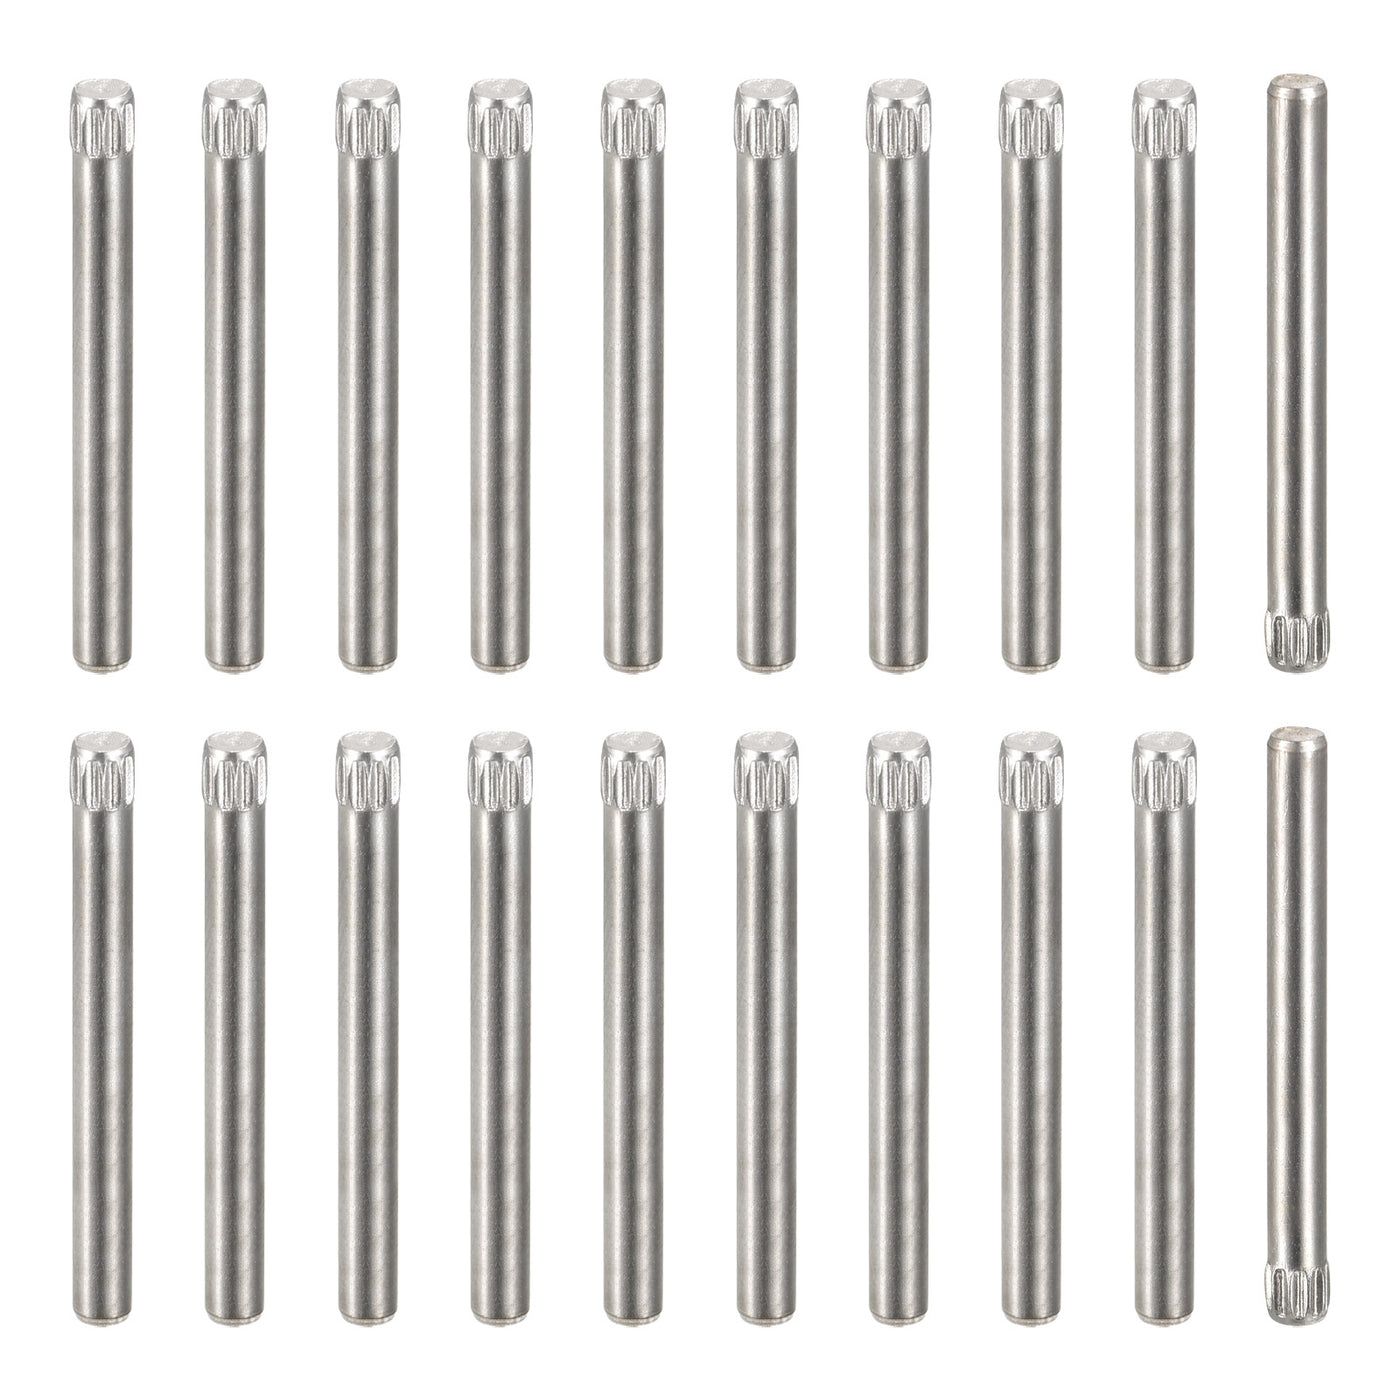 uxcell Uxcell 3x35mm 304 Stainless Steel Dowel Pins, 20Pcs Knurled Head Flat End Dowel Pin